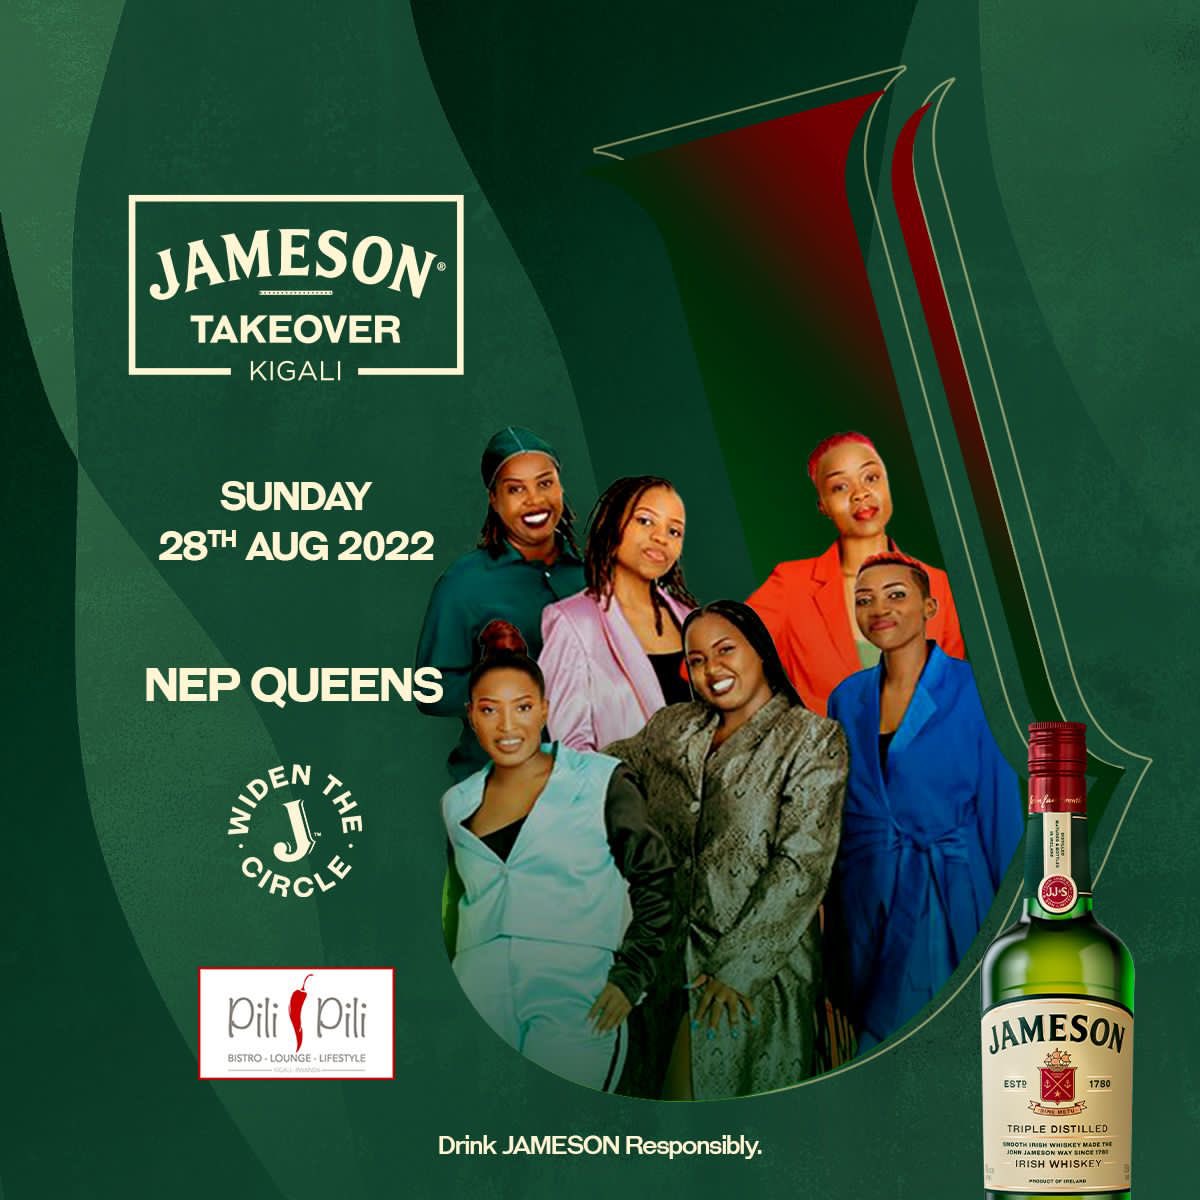 Don’t miss this Sunday 28th @pilipilirwanda the Jameson Takeover Kigali with our very own @djkiss256 and @nepqueenz Let’s get ready to Partttyyy🔥💃with @jamesonrwanda #JamesonTakeoverKigali @patycope @joxyparker @remmygious